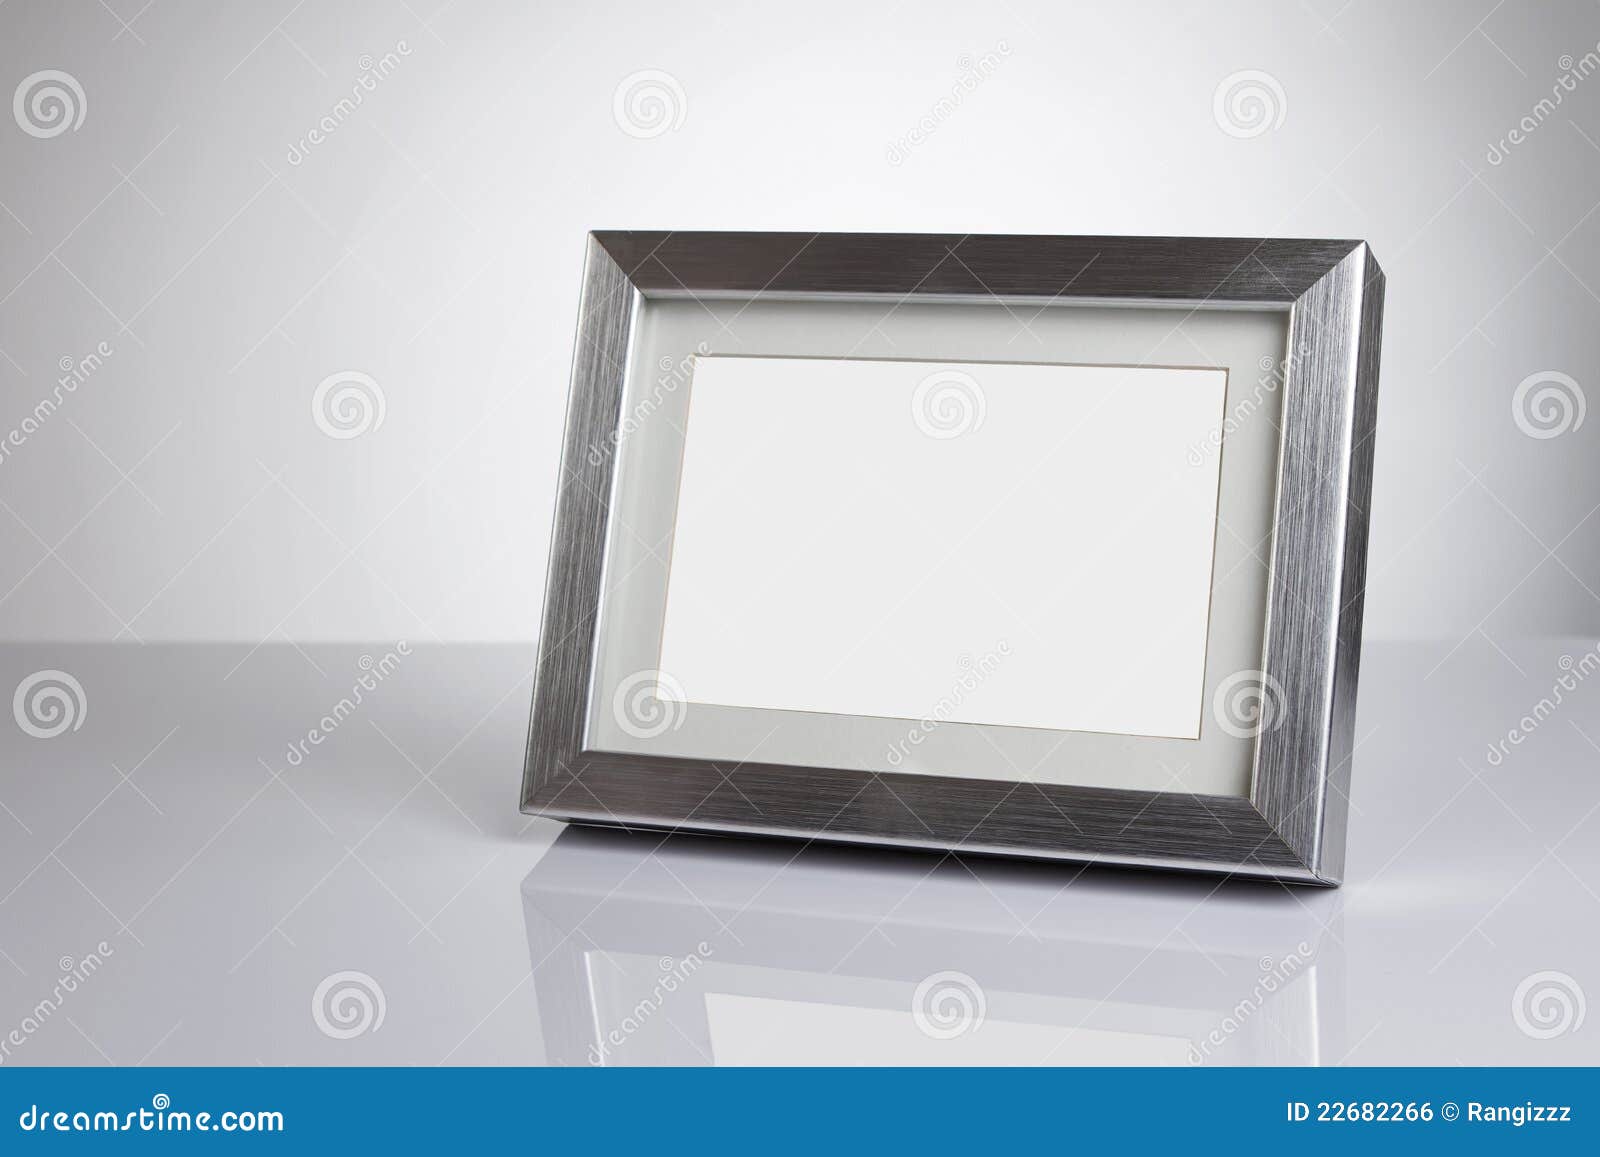 blank picture frame with clipping path